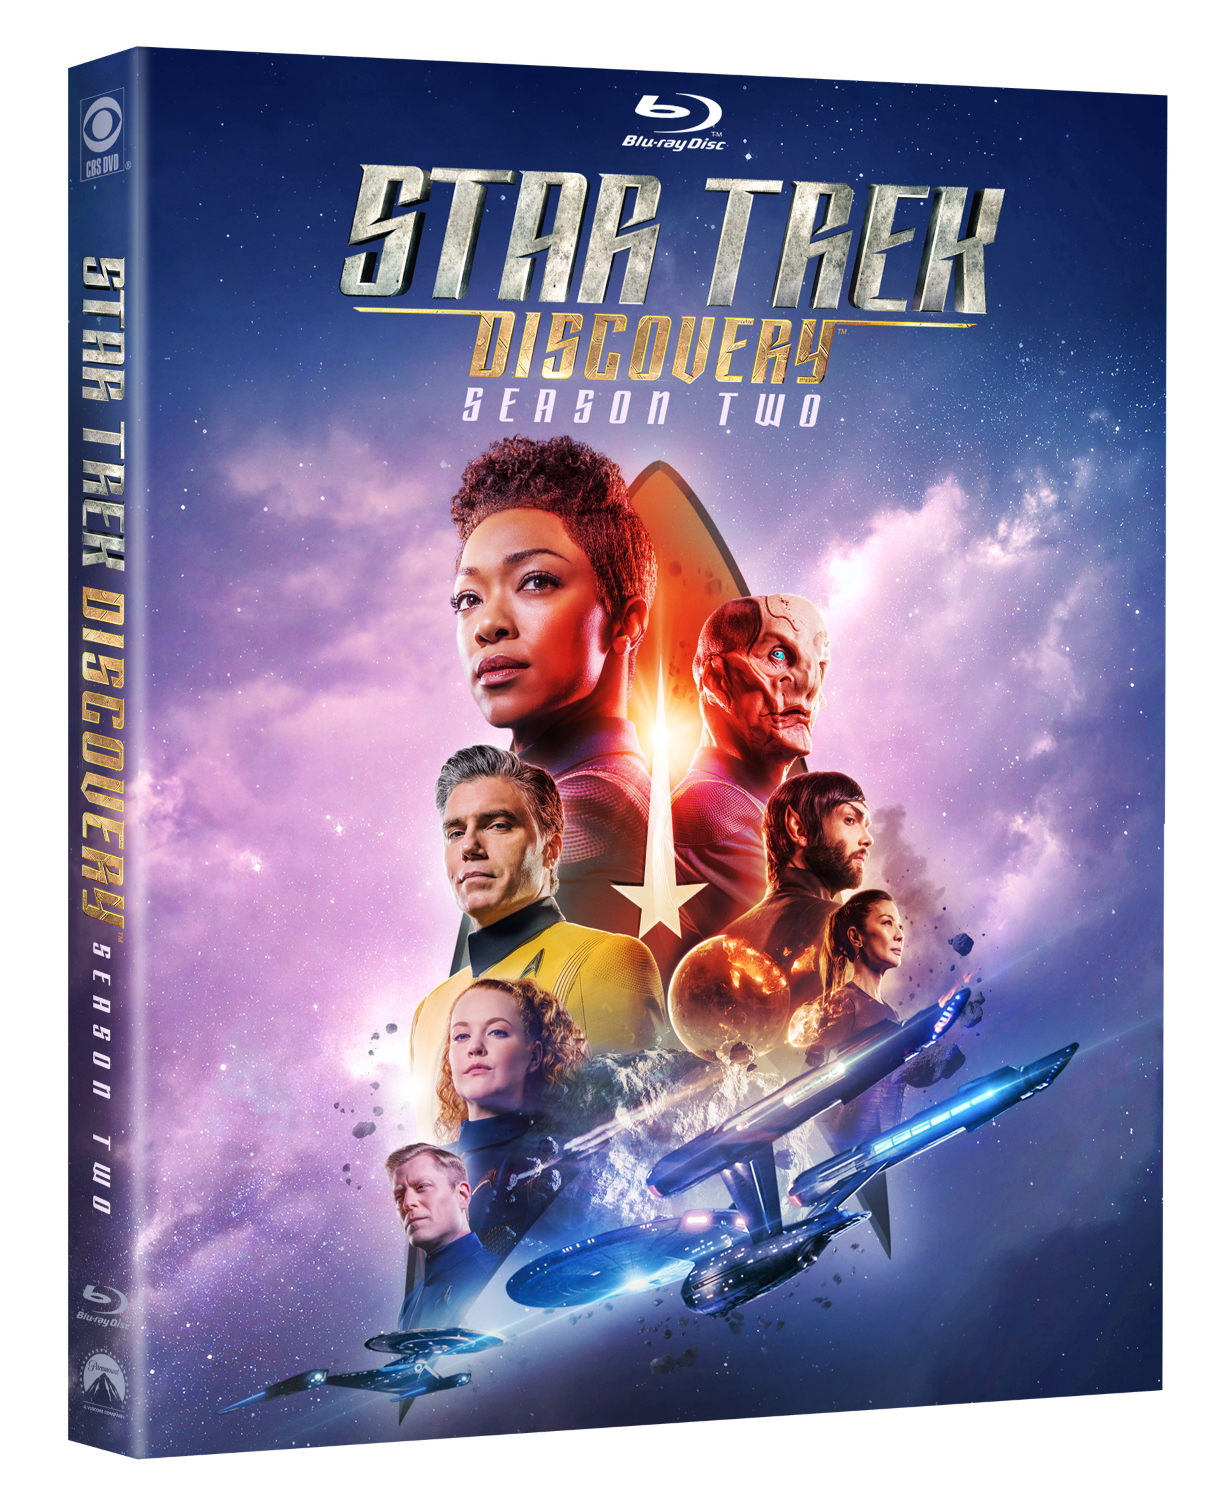 Star Trek: Discovery' Season 2 Arriving On Blu-ray And DVD In November –  